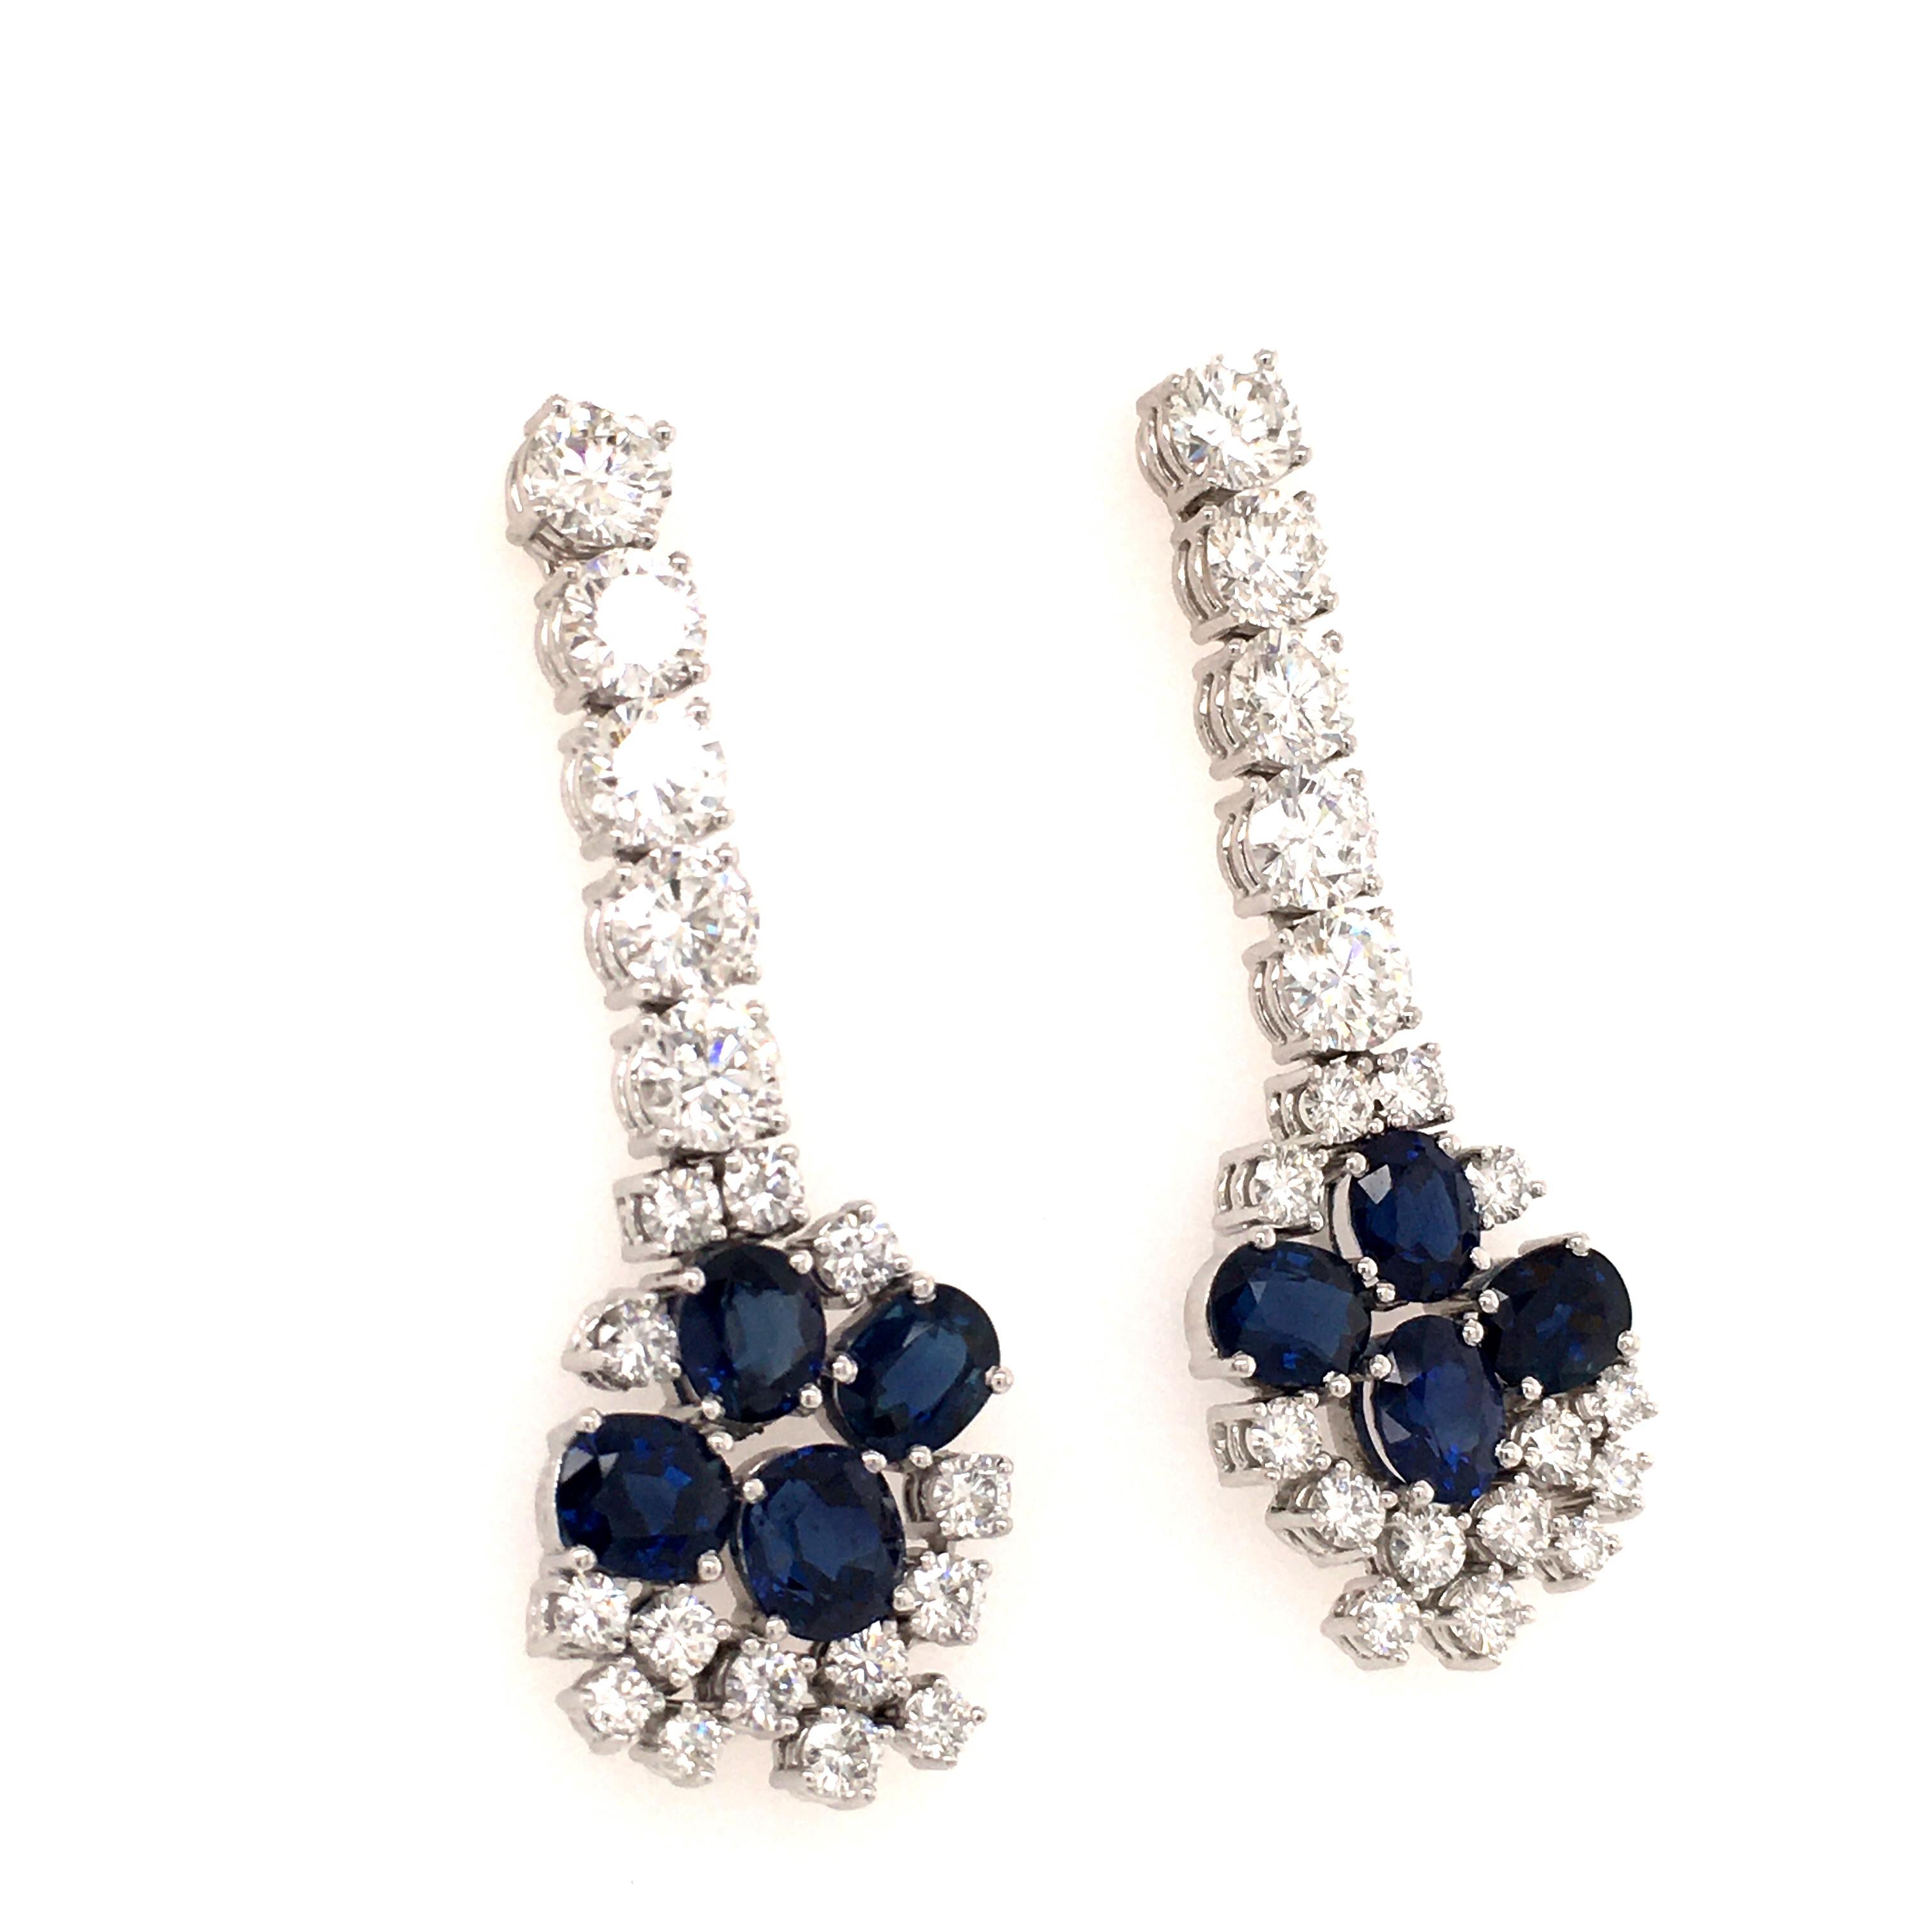 This beautiful pair of earstuds in 18 karat white gold is set with 8 oval shaped sapphires, total weight approximately 8.00 carats, and 40 brilliant-cut diamonds of G/H color. 
The upper ten diamonds are of vvs clarity and have a total weight of